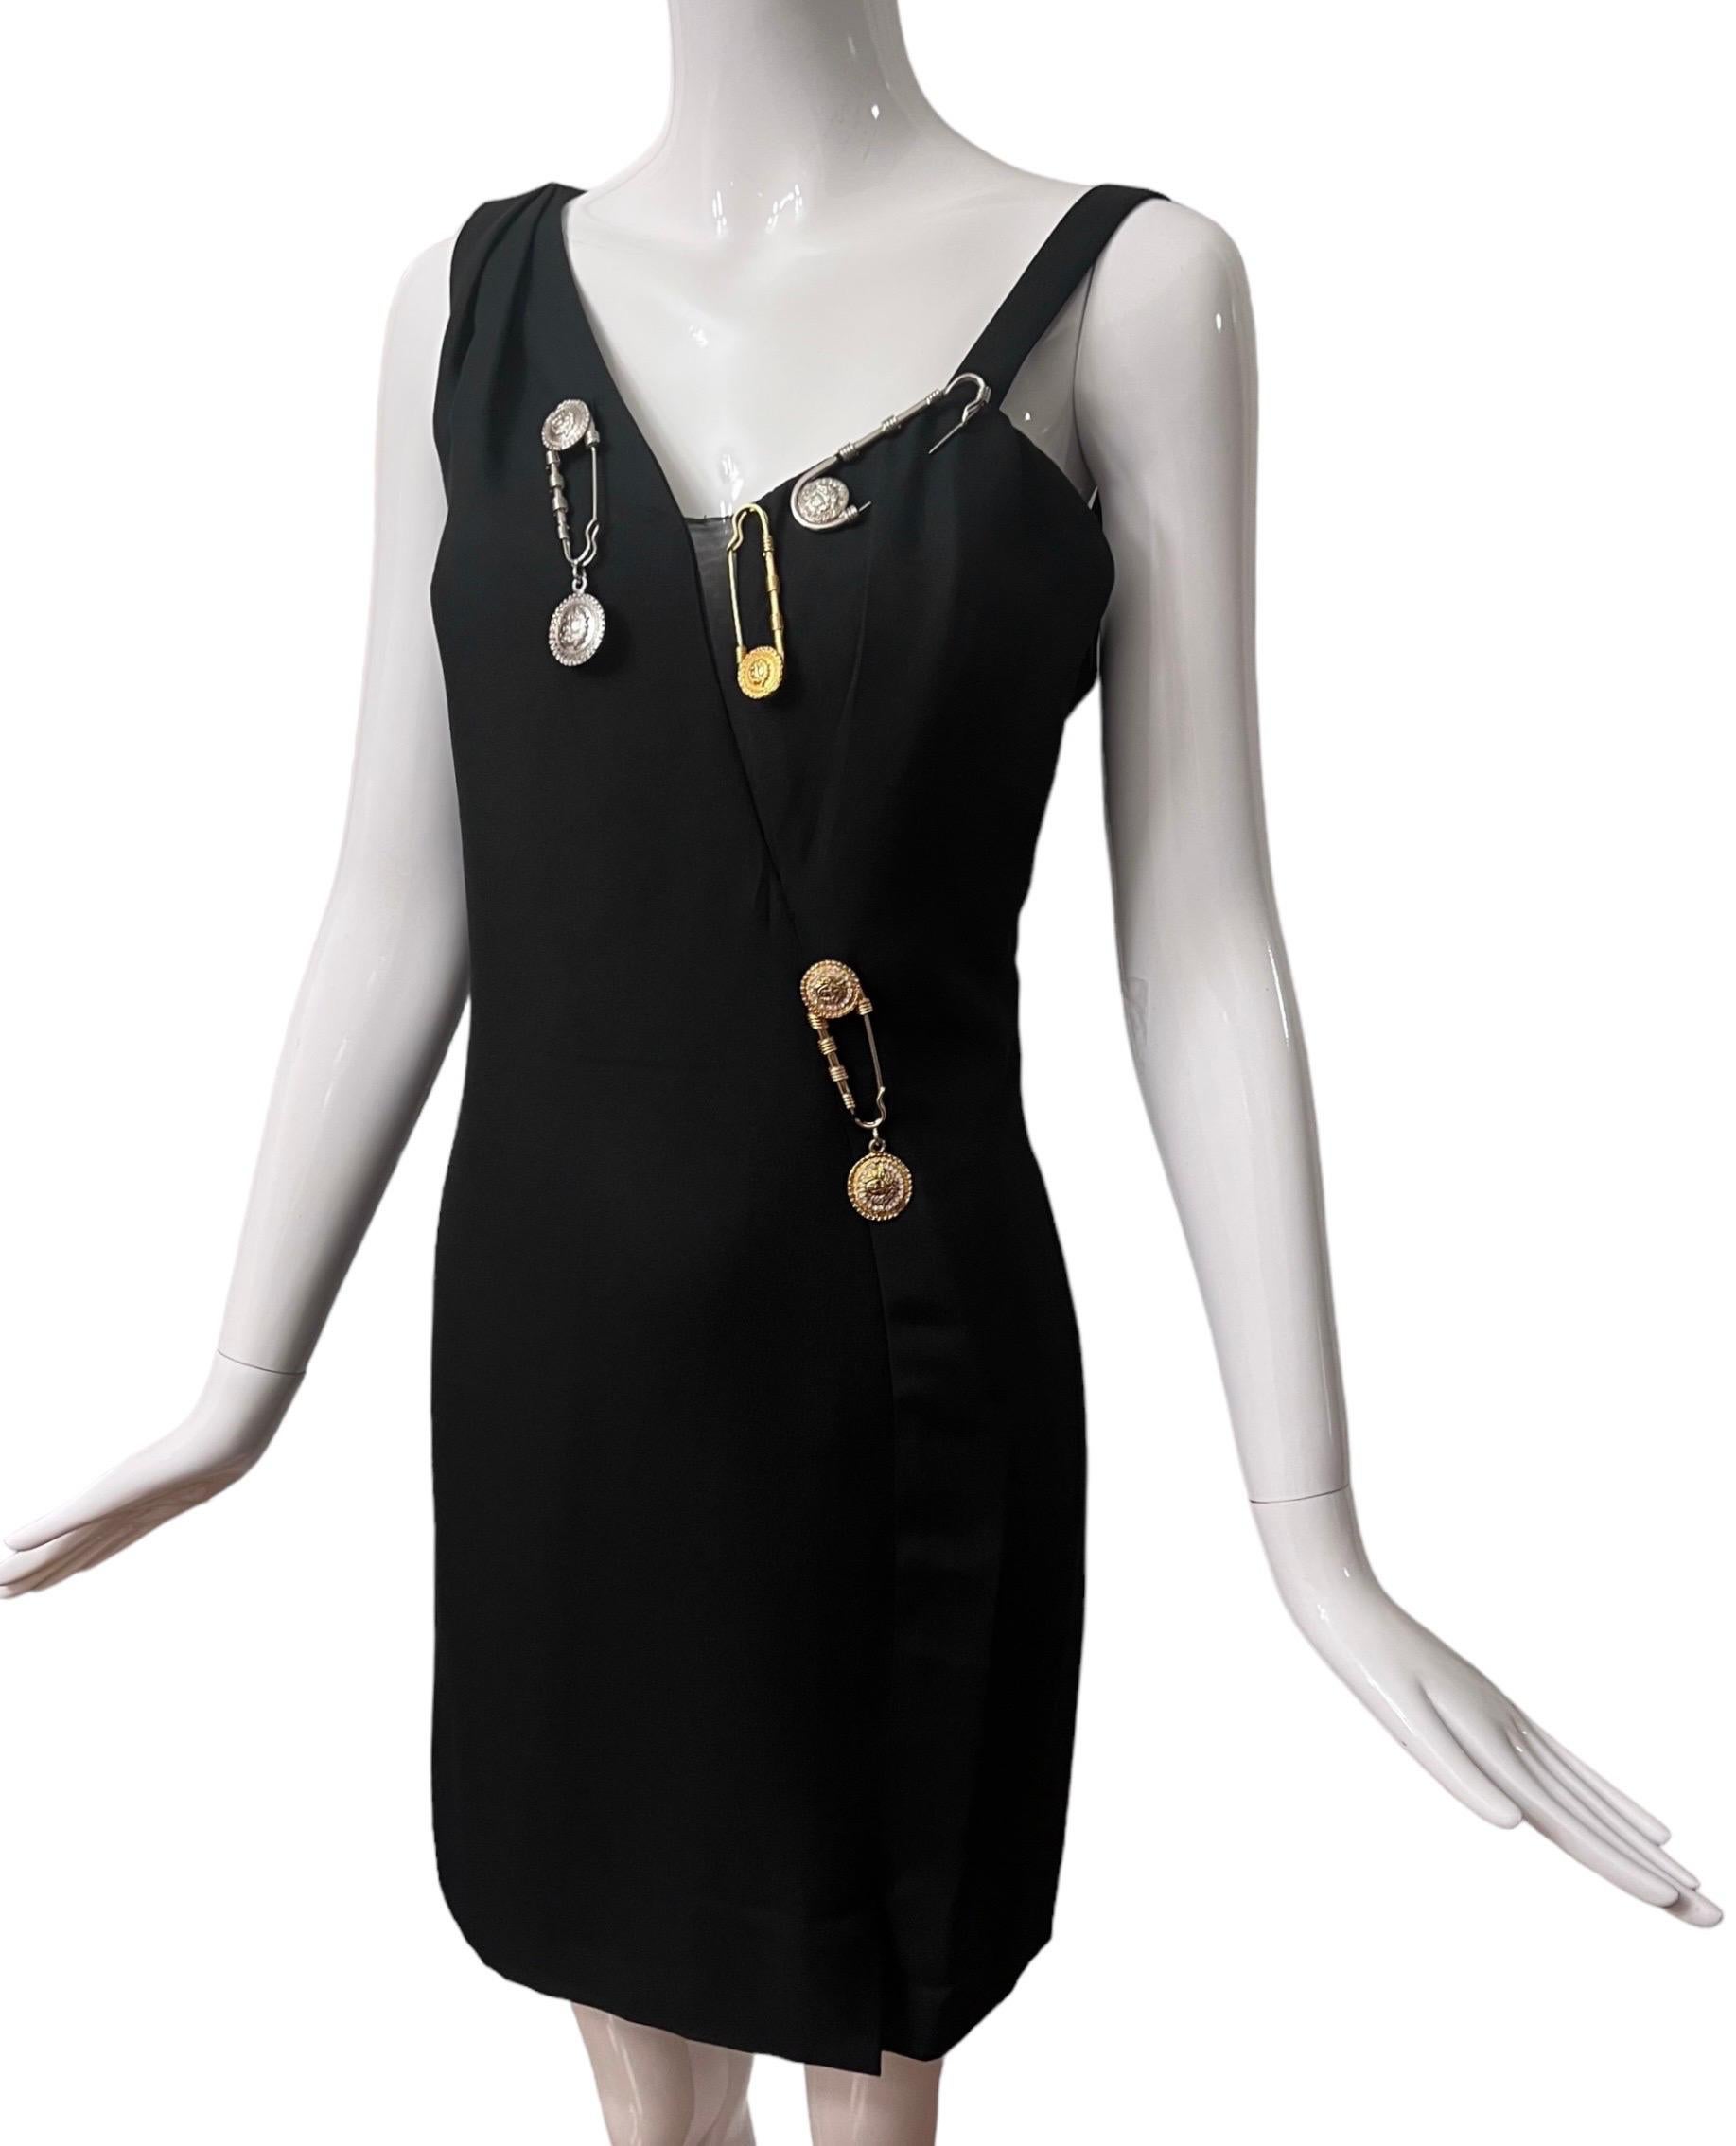 S/S 1994 Gianni Versace Safety Pin Medusa Embellished Black Mini Dress In Excellent Condition For Sale In Concord, NC